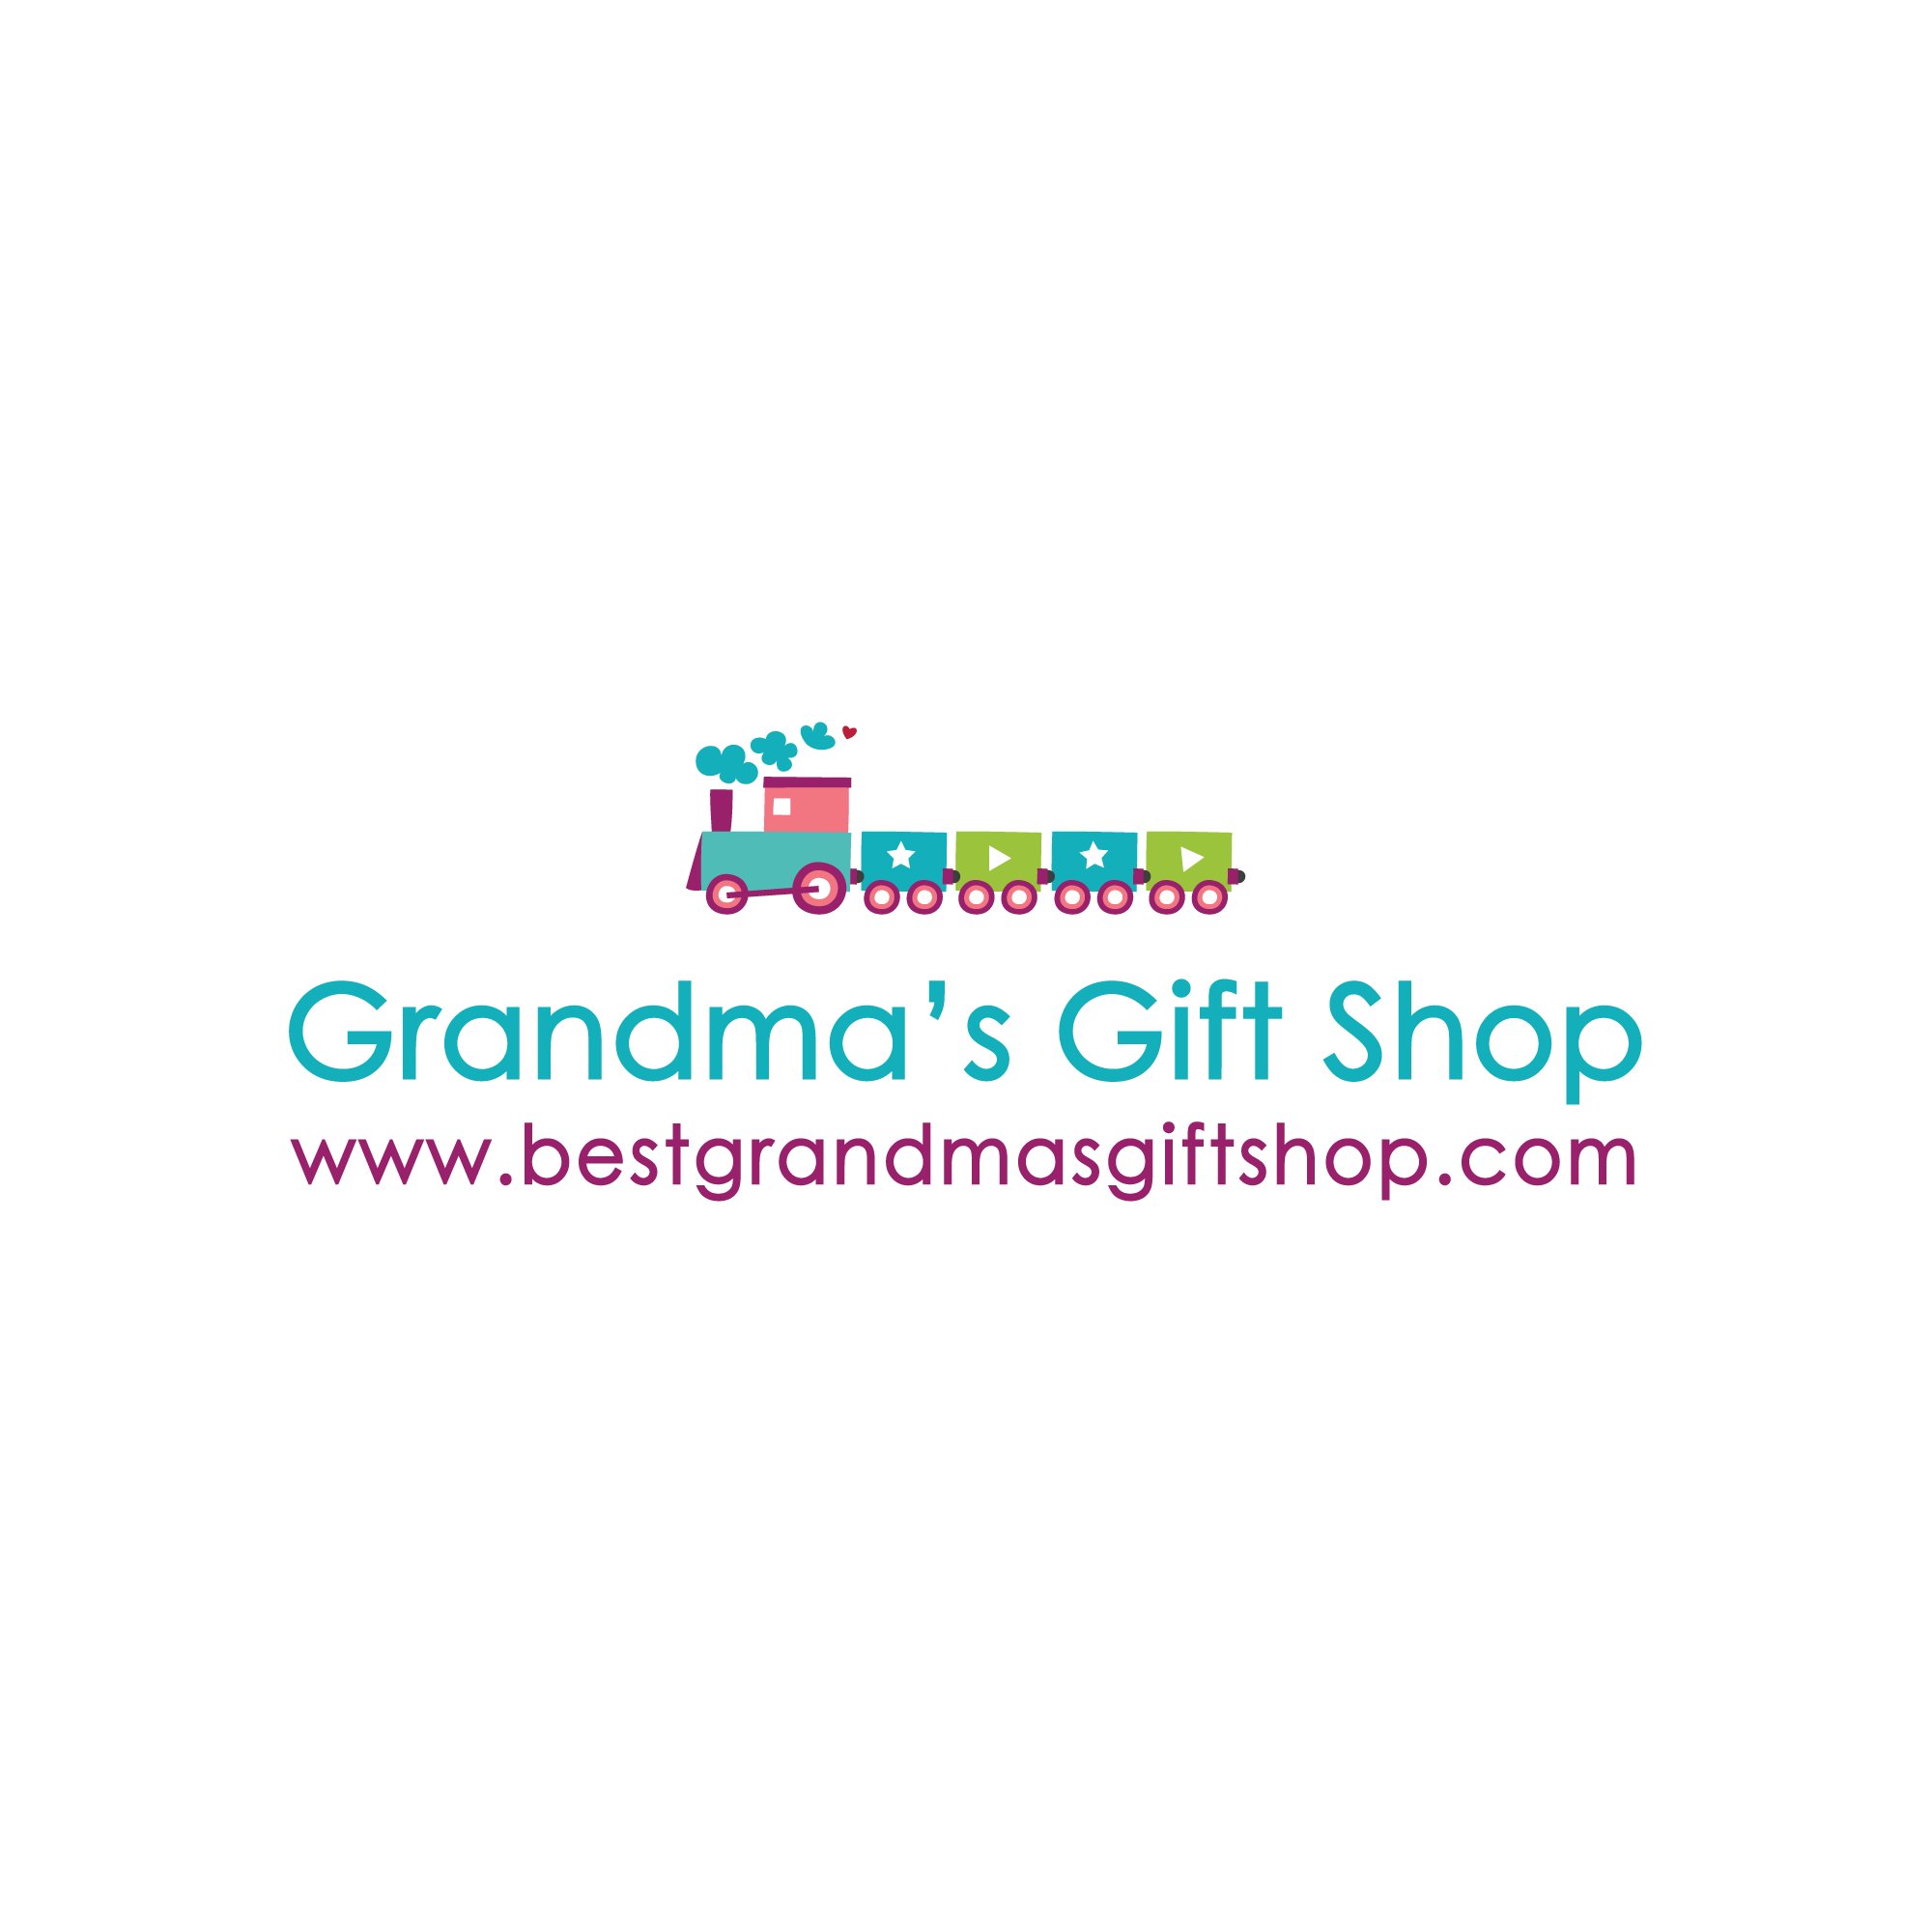 Looking for a gift? Look no further! Grandma's Gift Shop will help you find the best products at the best price.